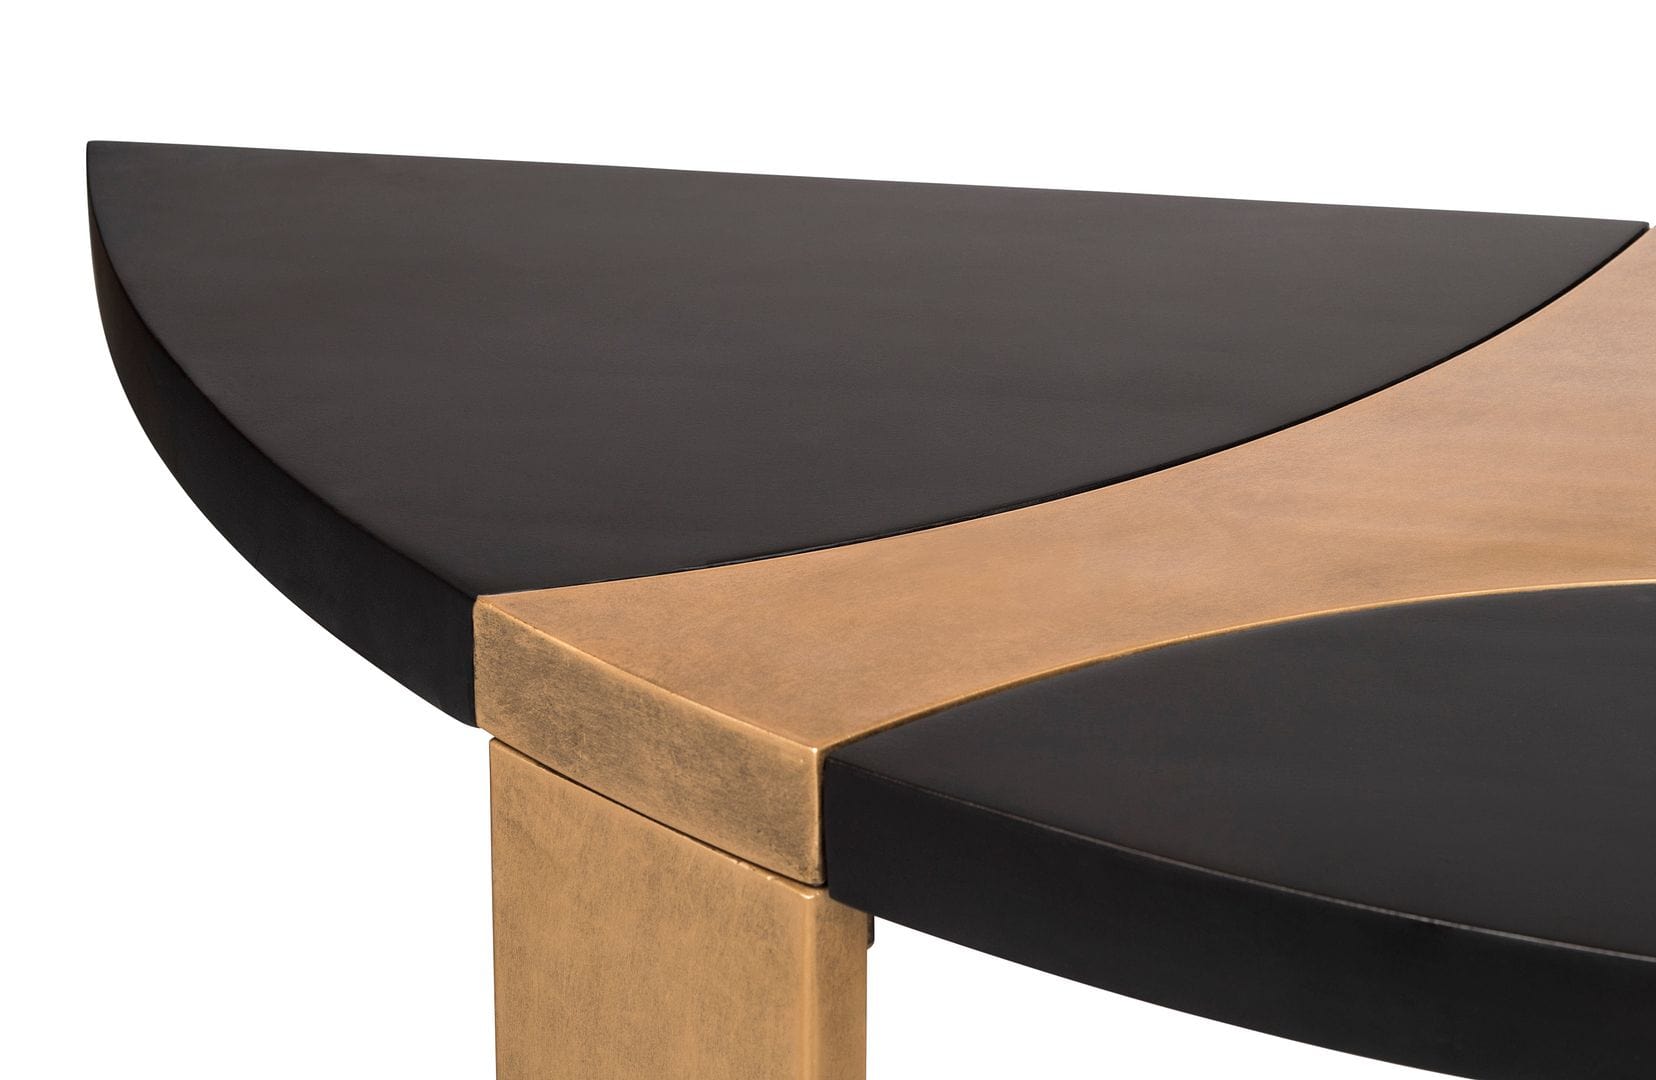 Stylish Half Round Brass and Black Console Table for Hallways